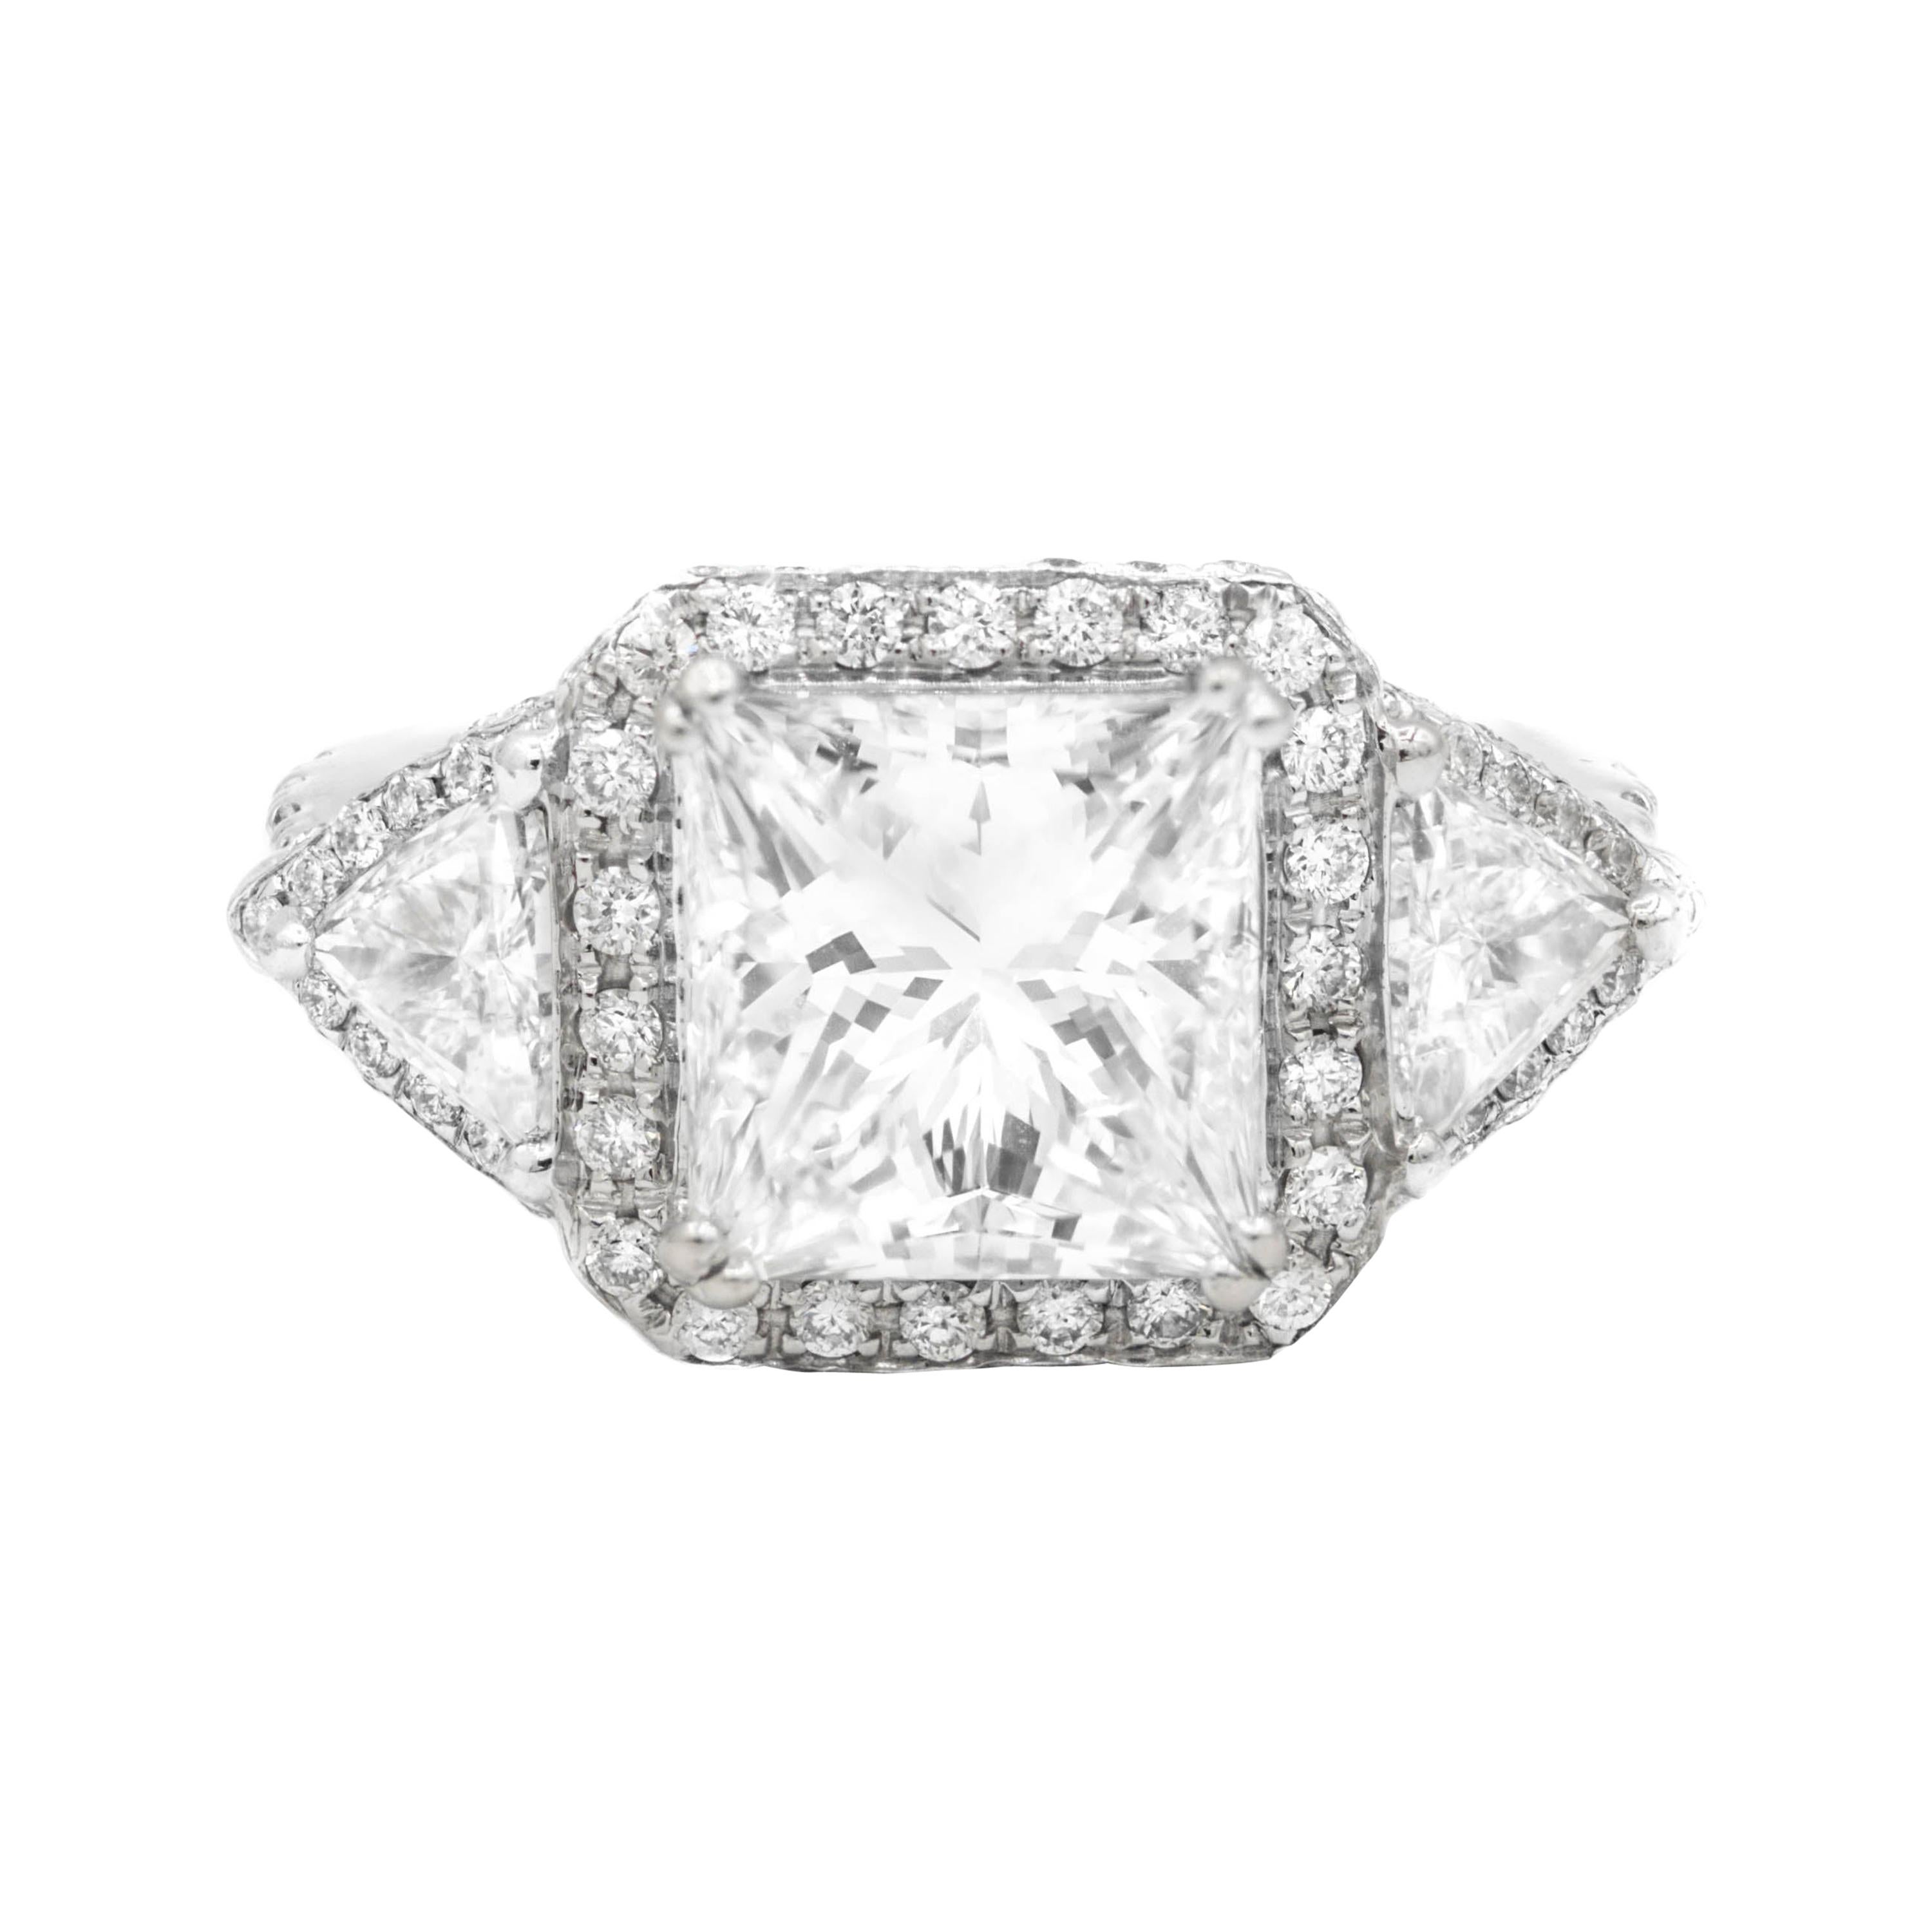 18k White Gold Engagemend Ring with Diamonds